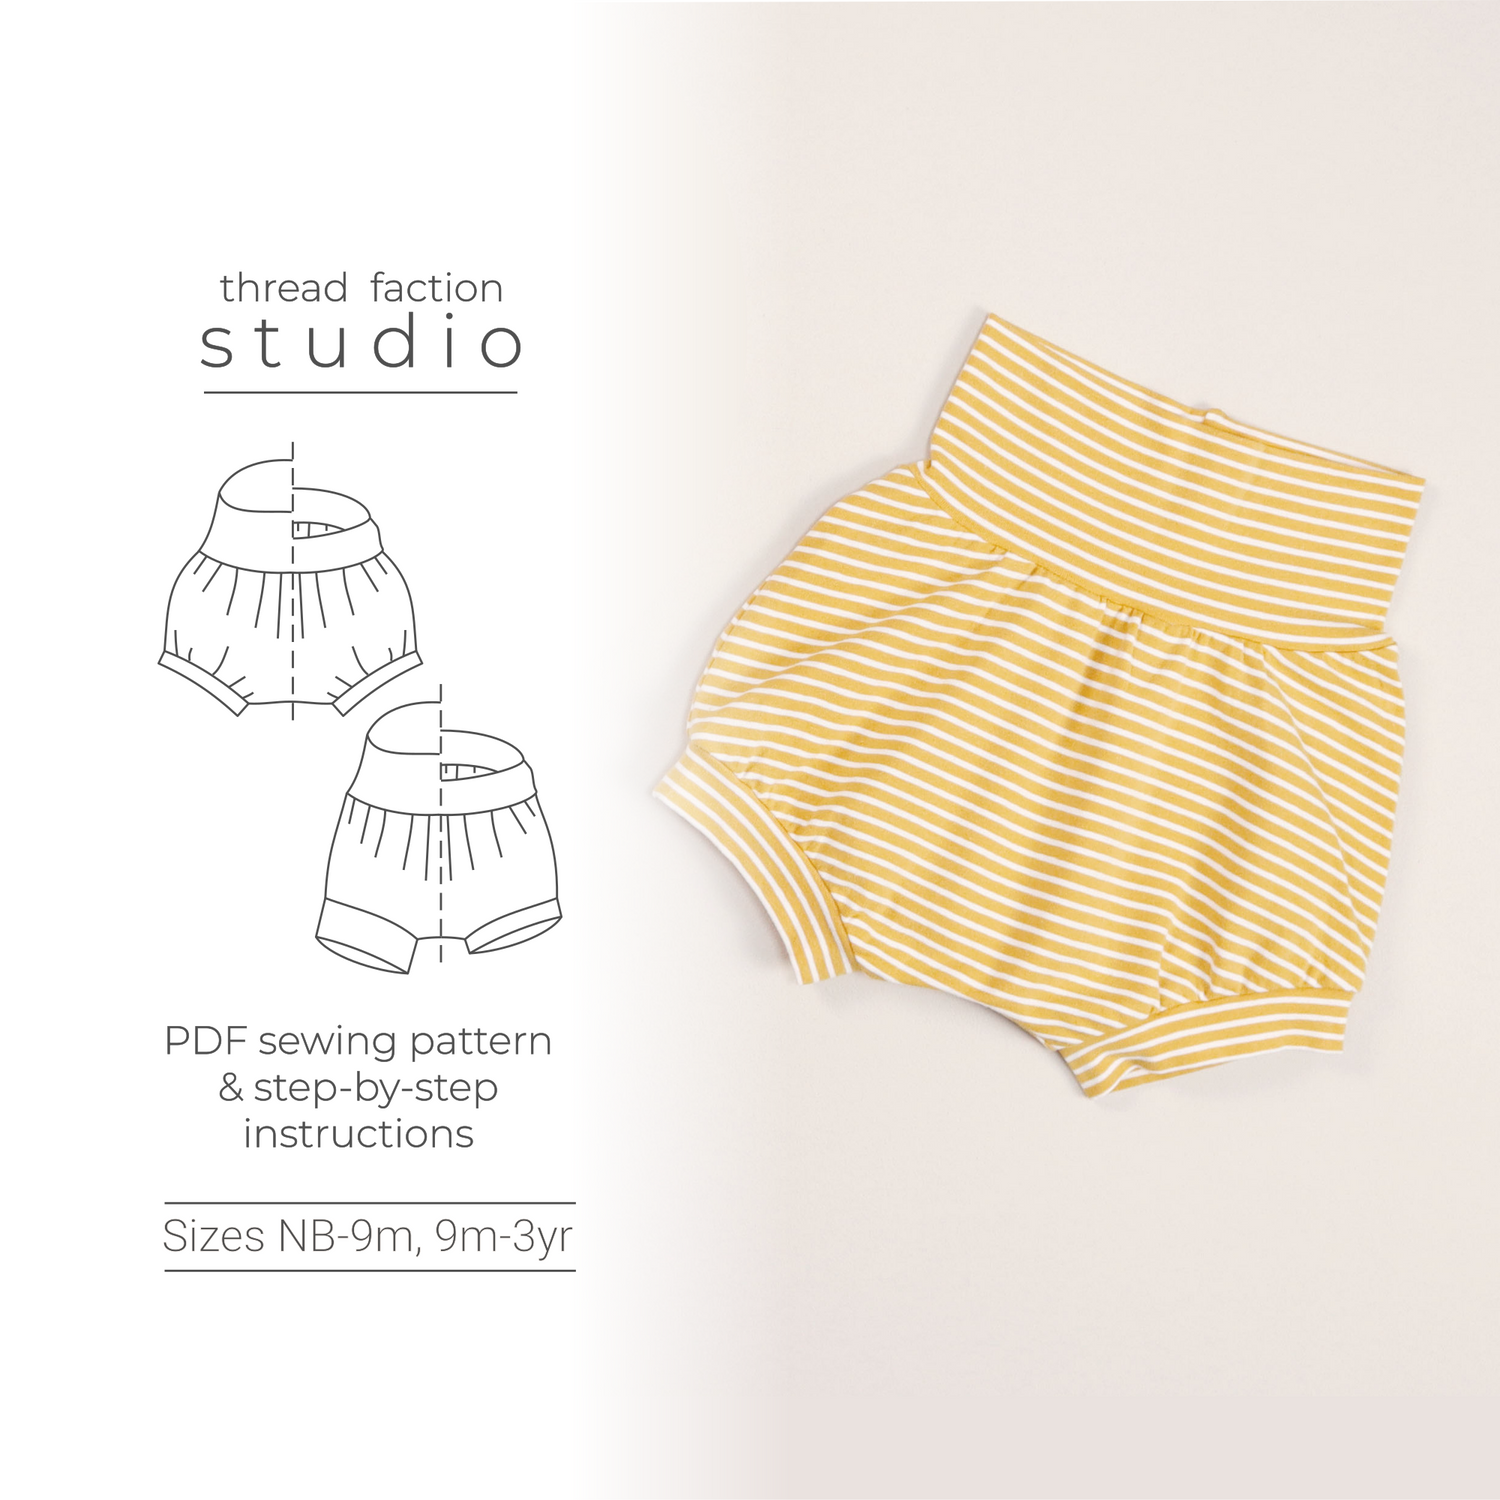 Grow-with-me Shorties PDF Sewing Pattern – Thread Faction Studio